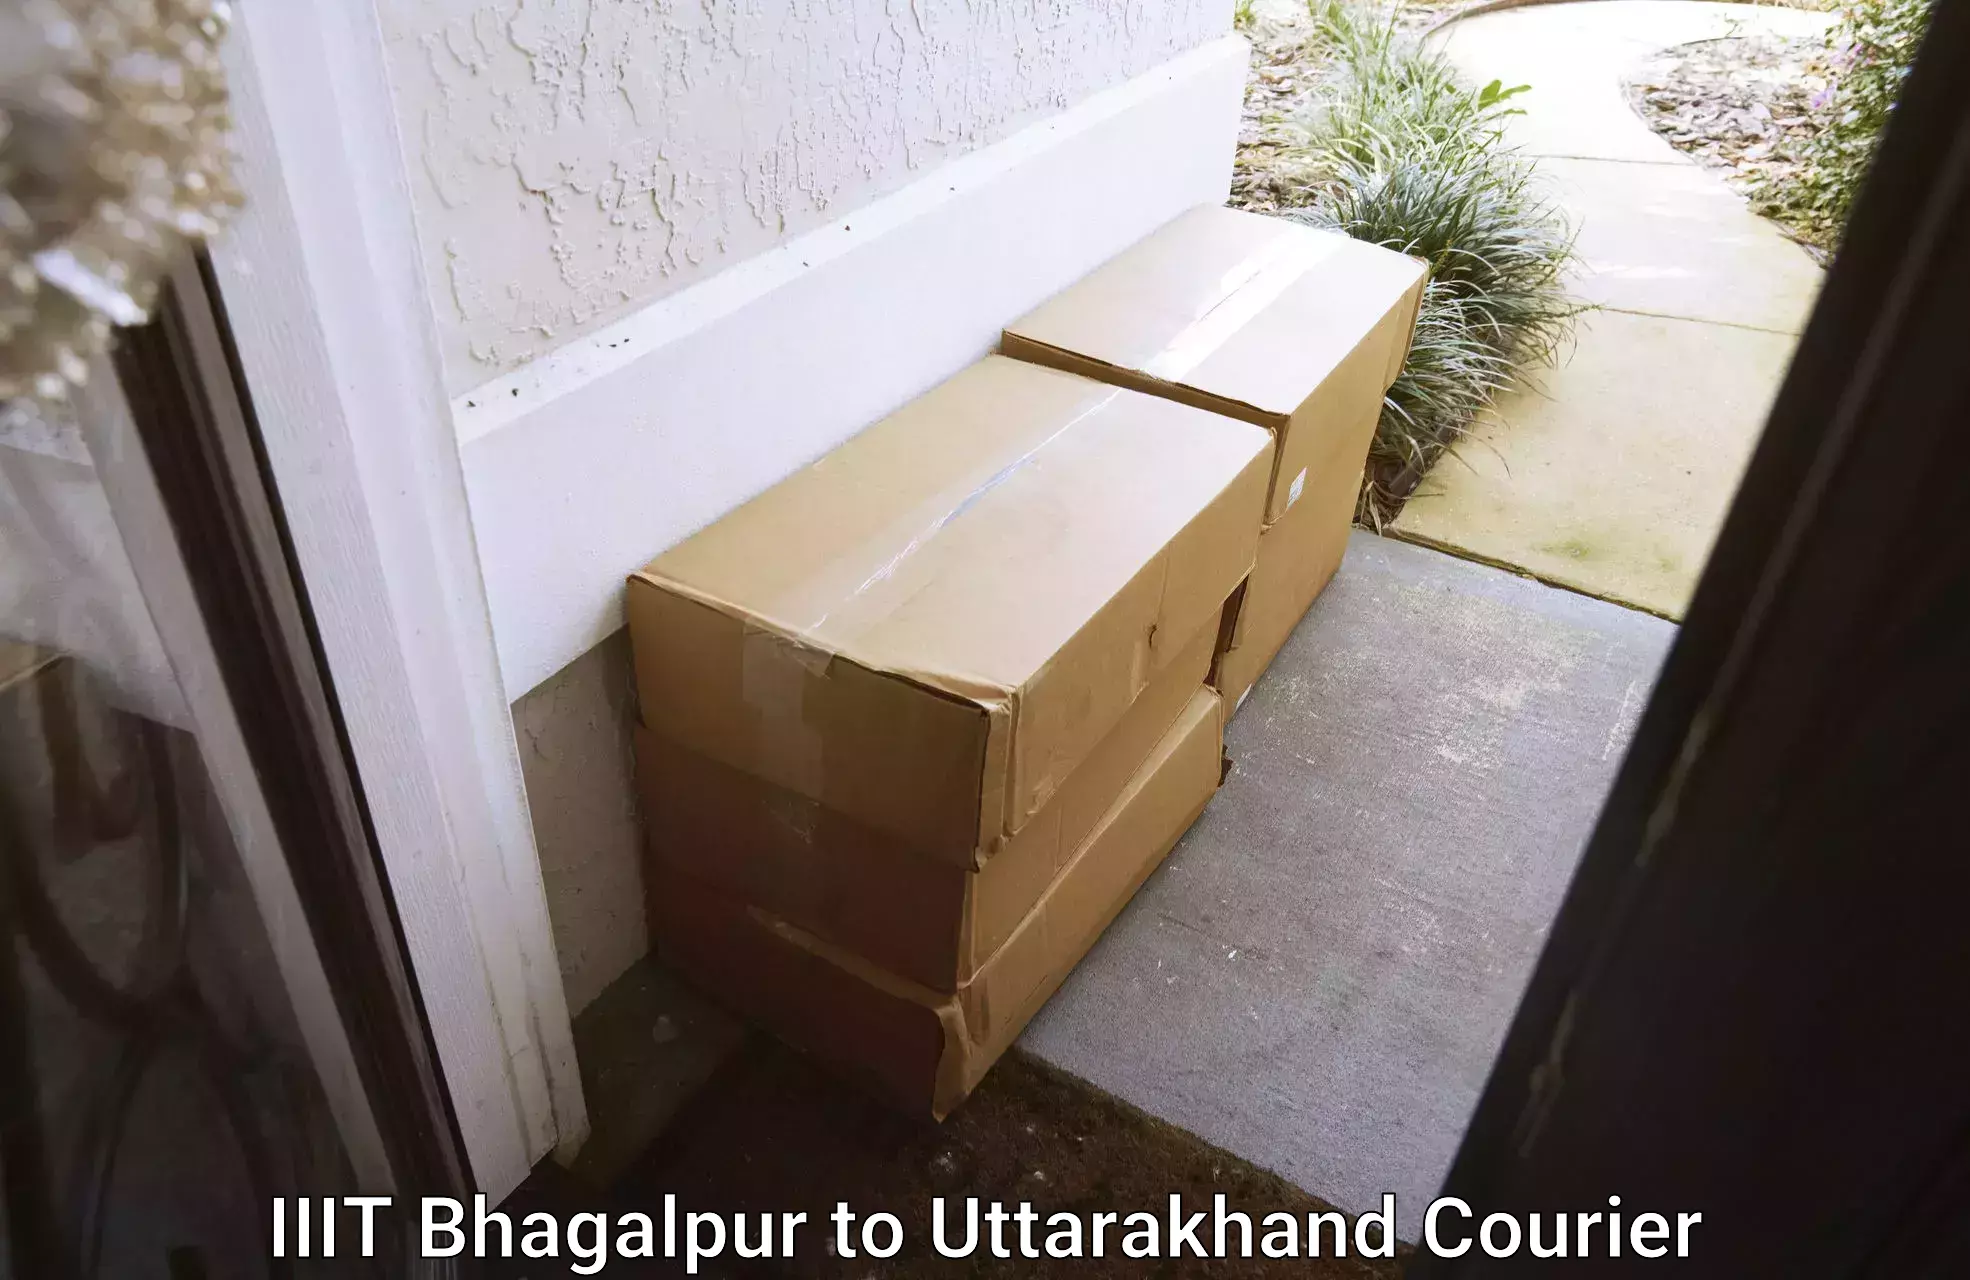 Trusted moving company IIIT Bhagalpur to Mussoorie